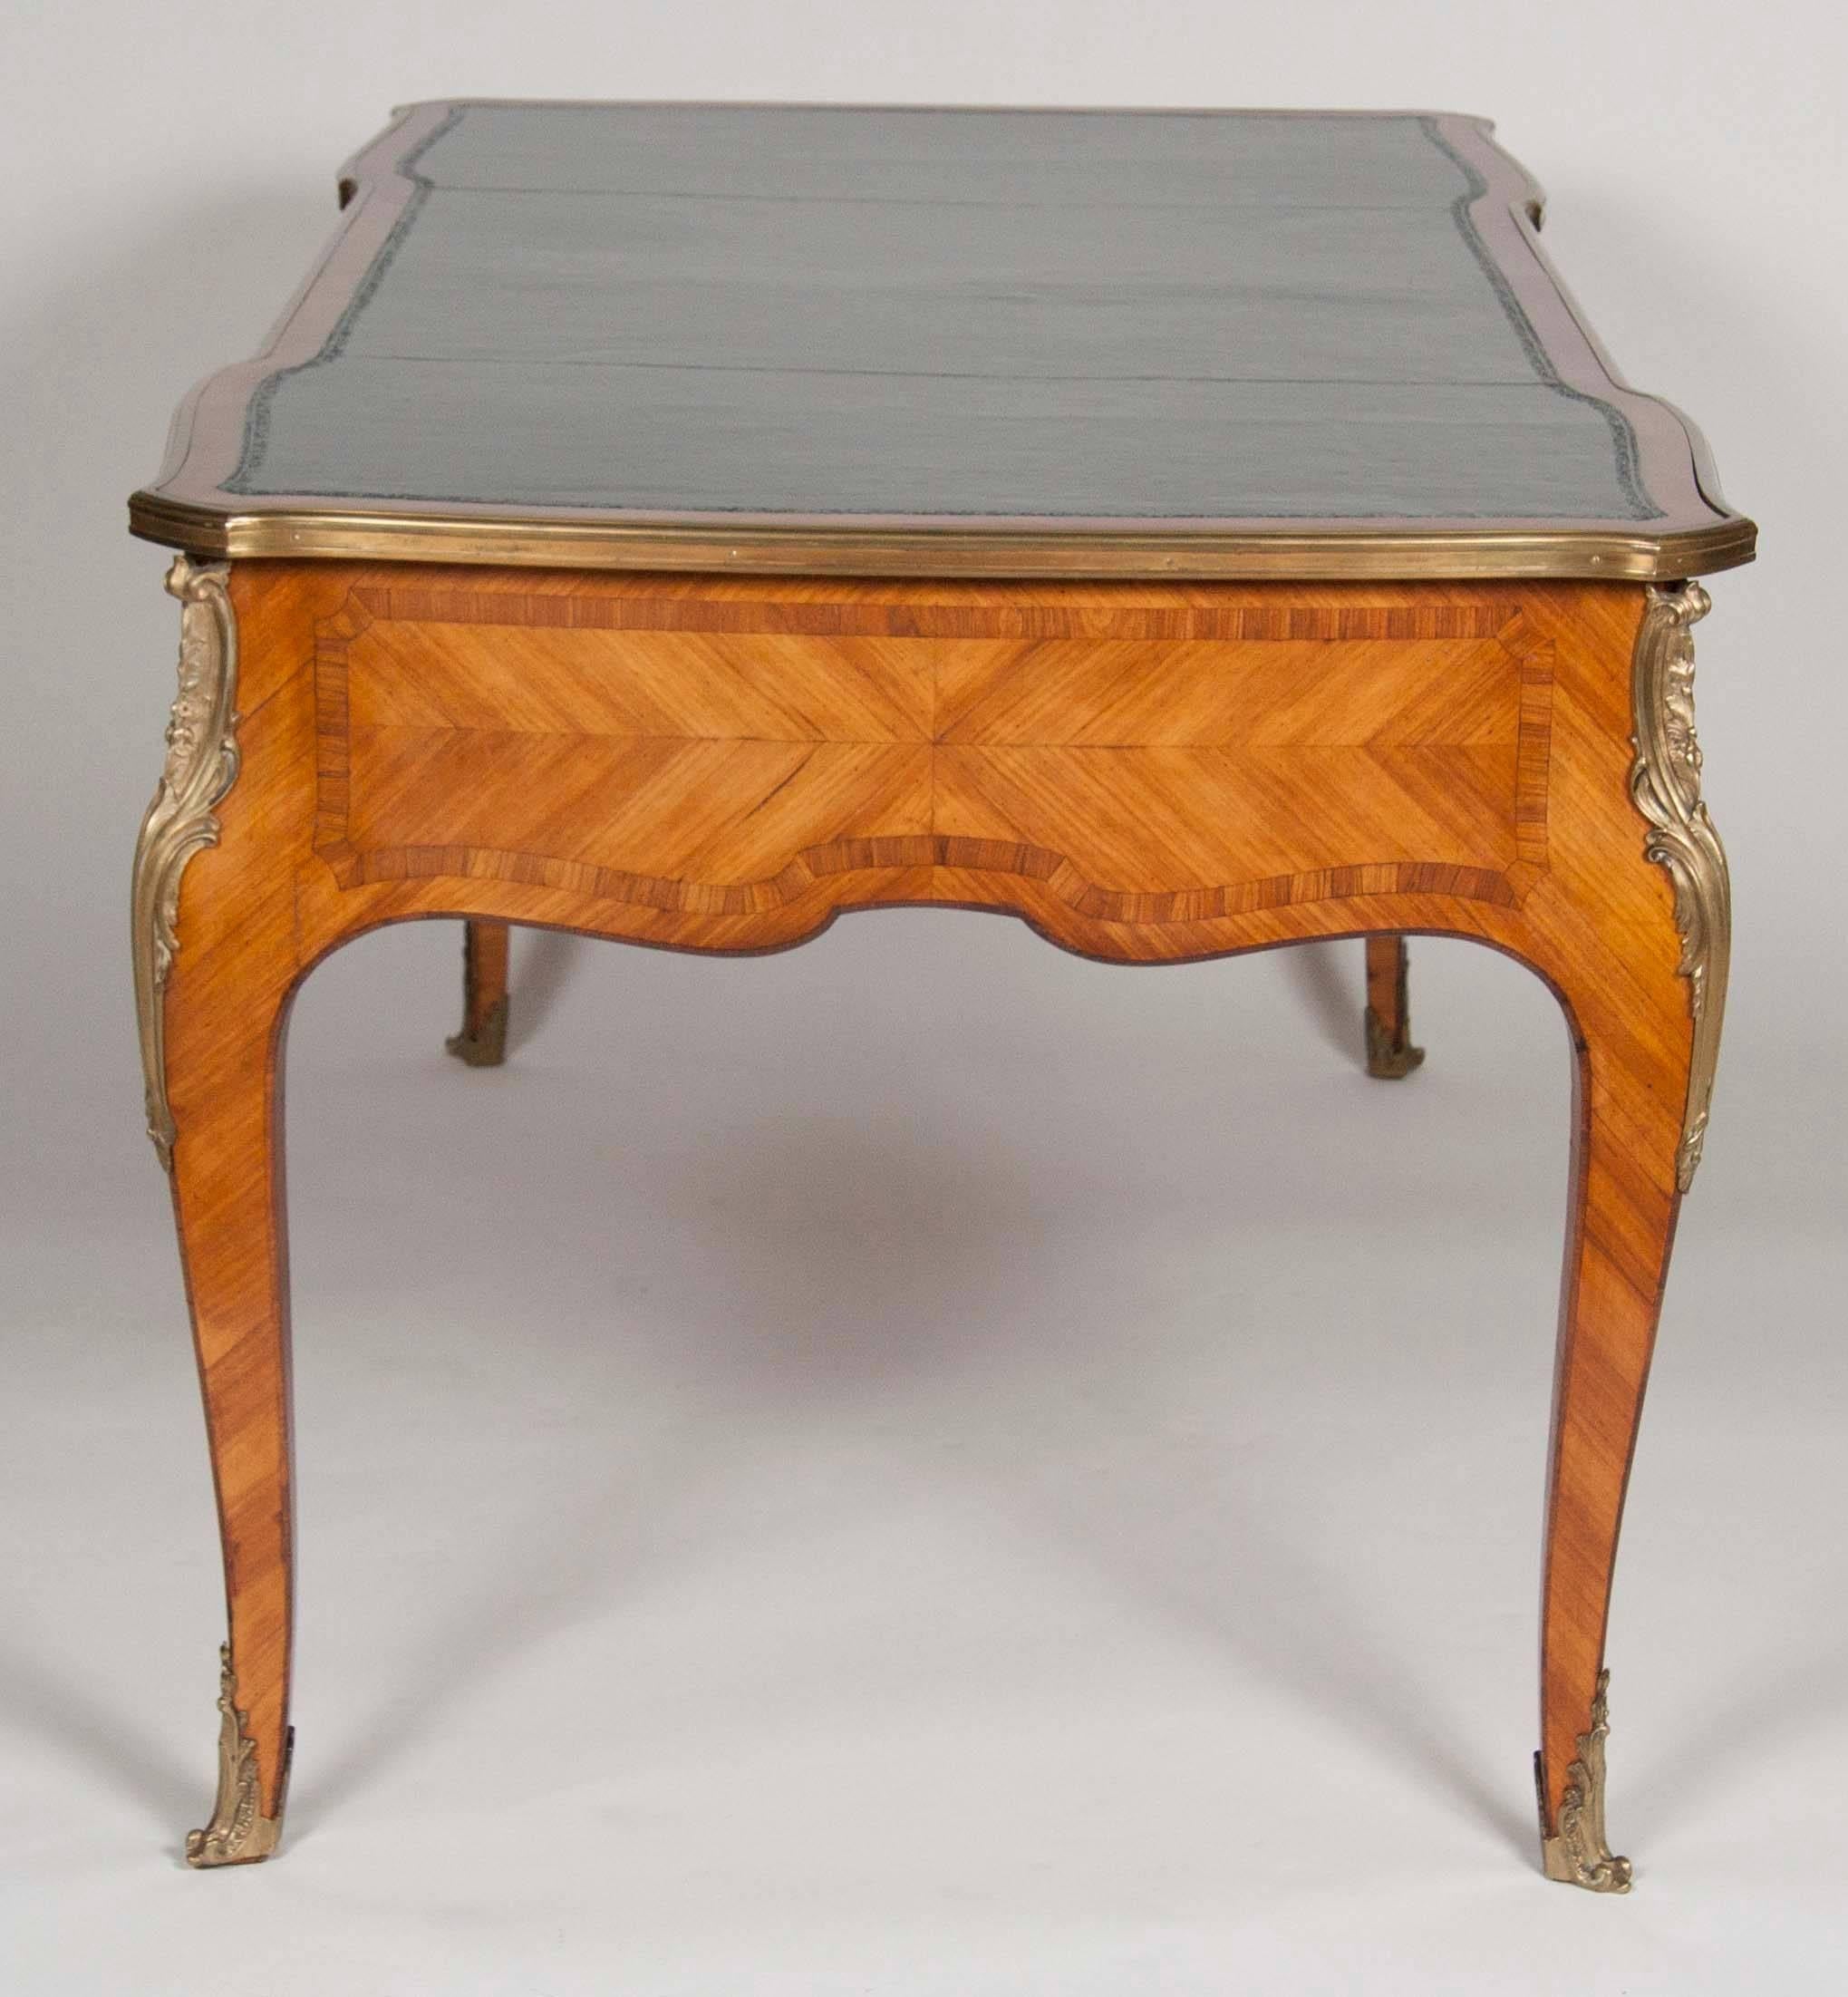 Kingwood Bureau Plat in the Louis XV Style with Tooled Leather Top 1